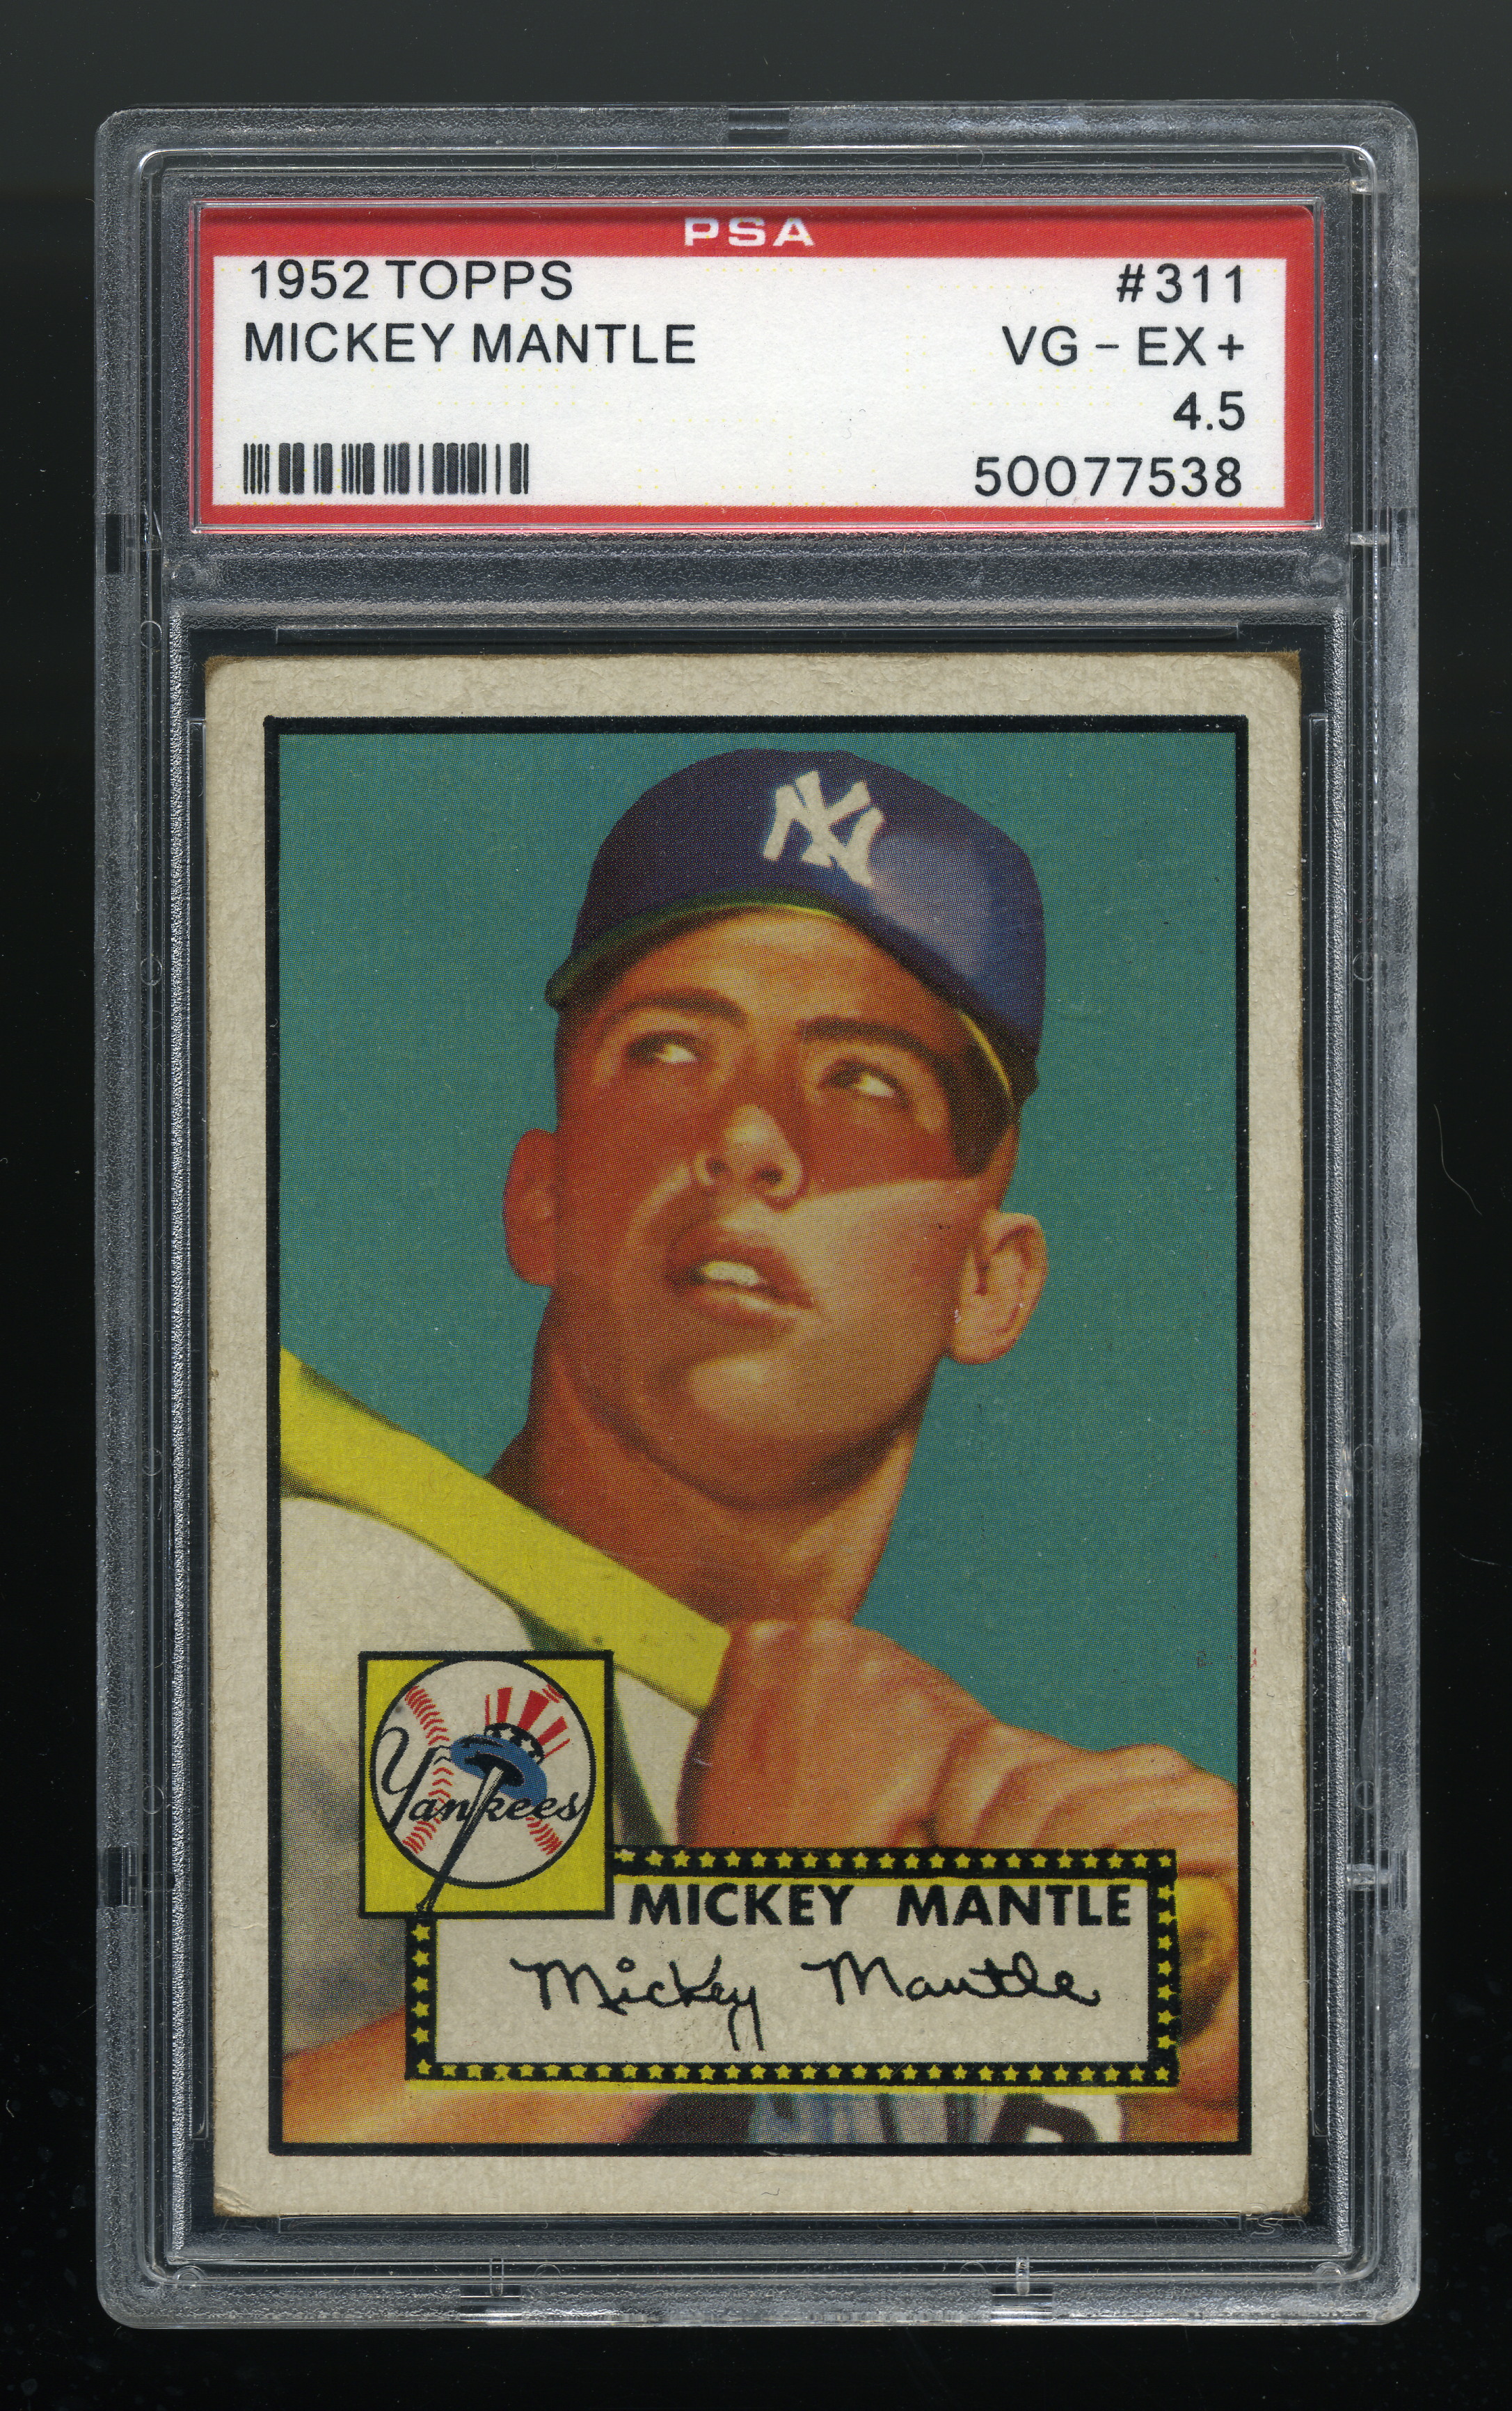 CSG Certifies a Distinctively Altered 1952 Topps Mickey Mantle Card